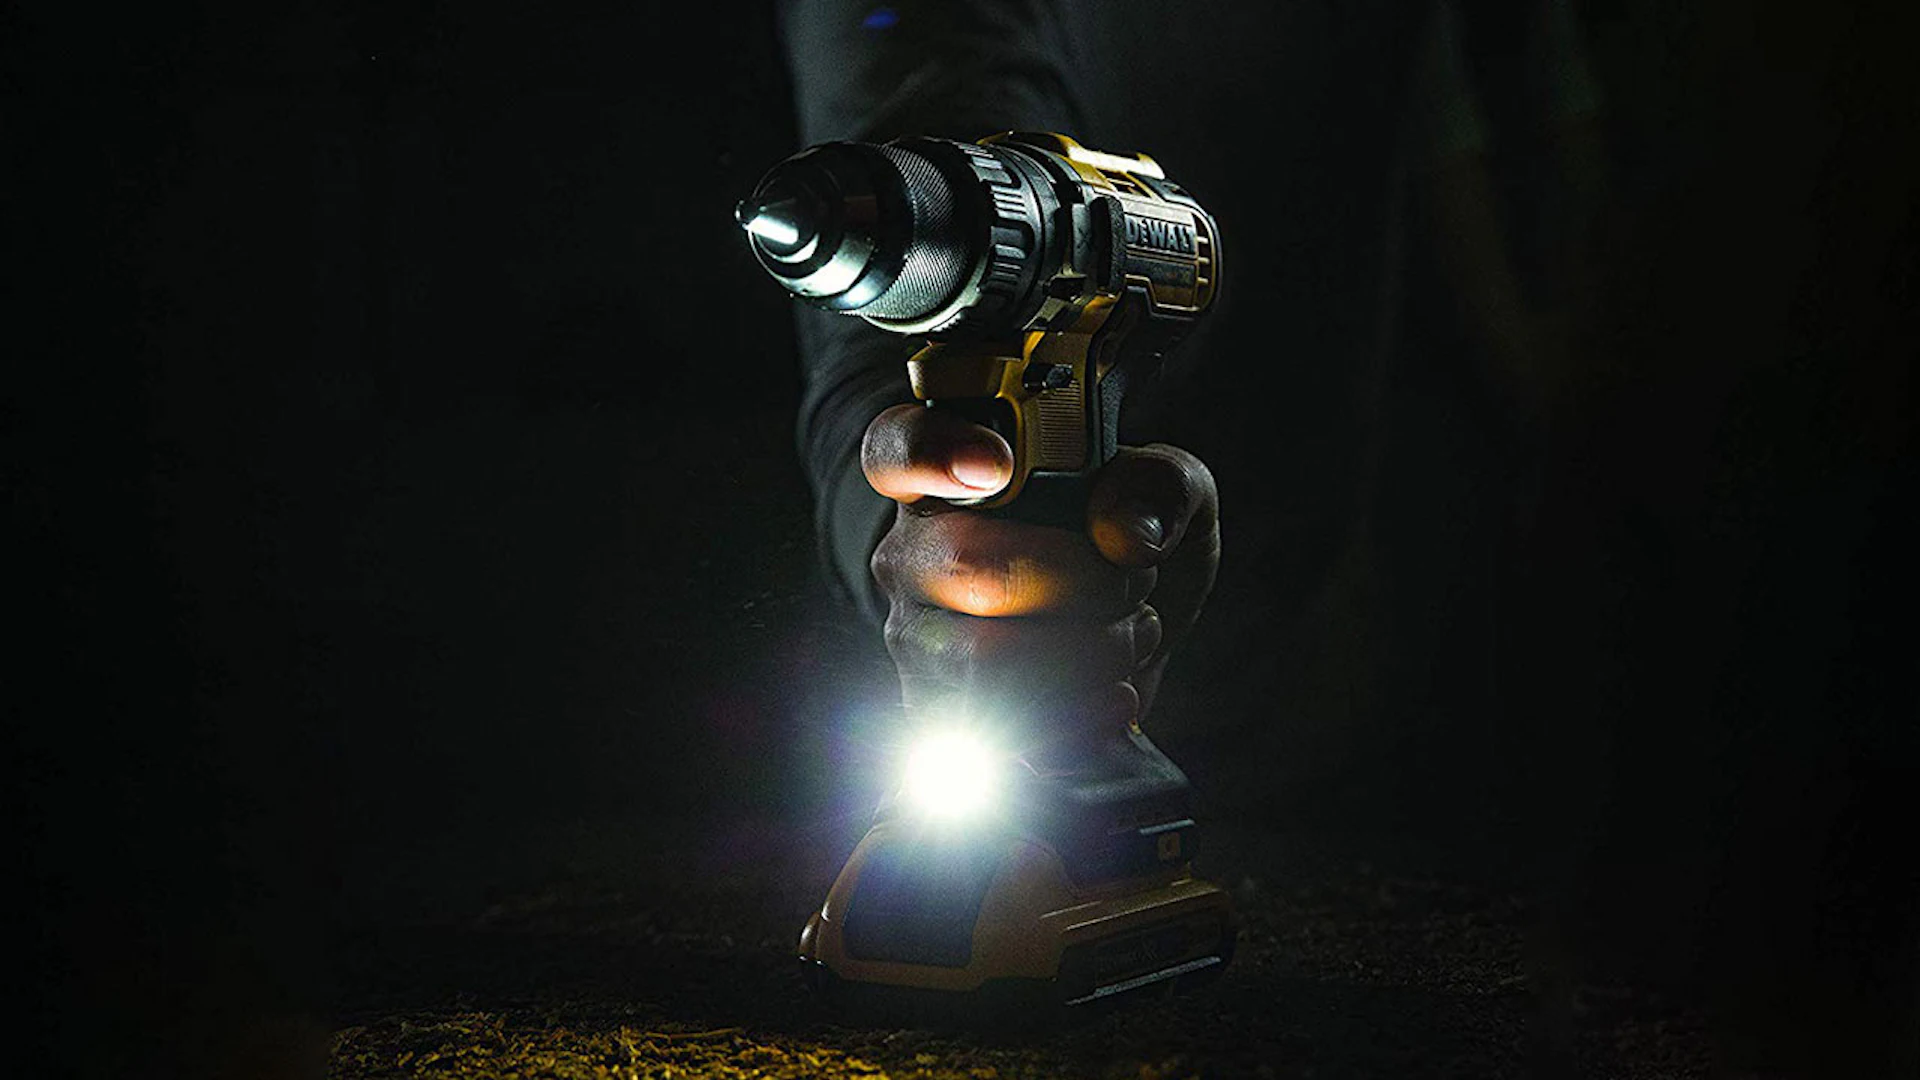 DeWALT 18V Cordless Impact Drill DCD796 - without battery